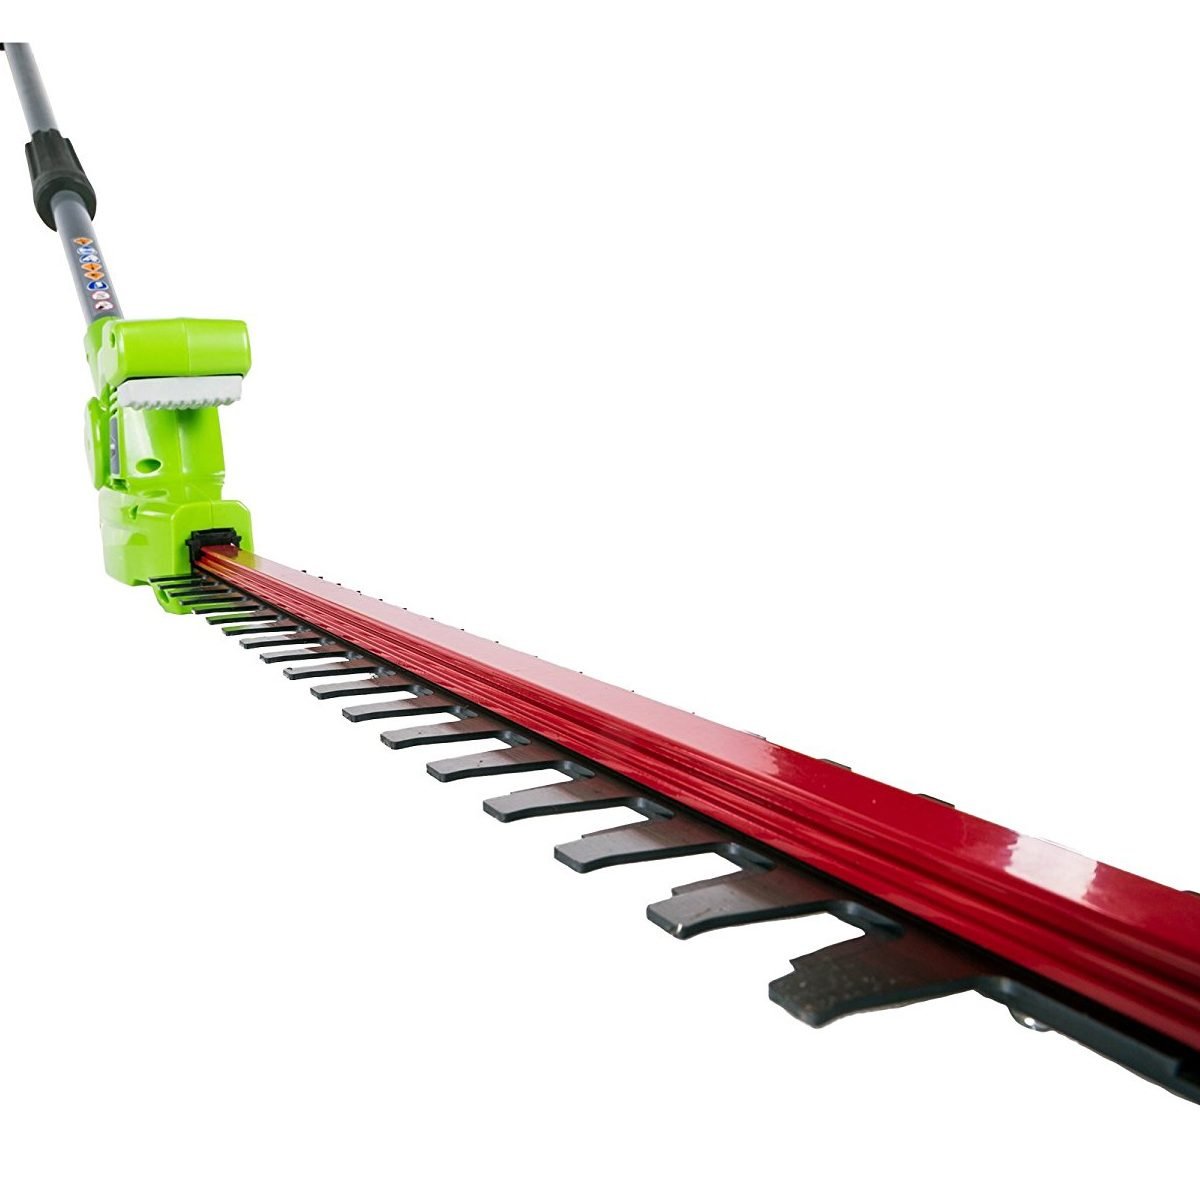 Extendable Hedge Trimmer and Tree Pruner